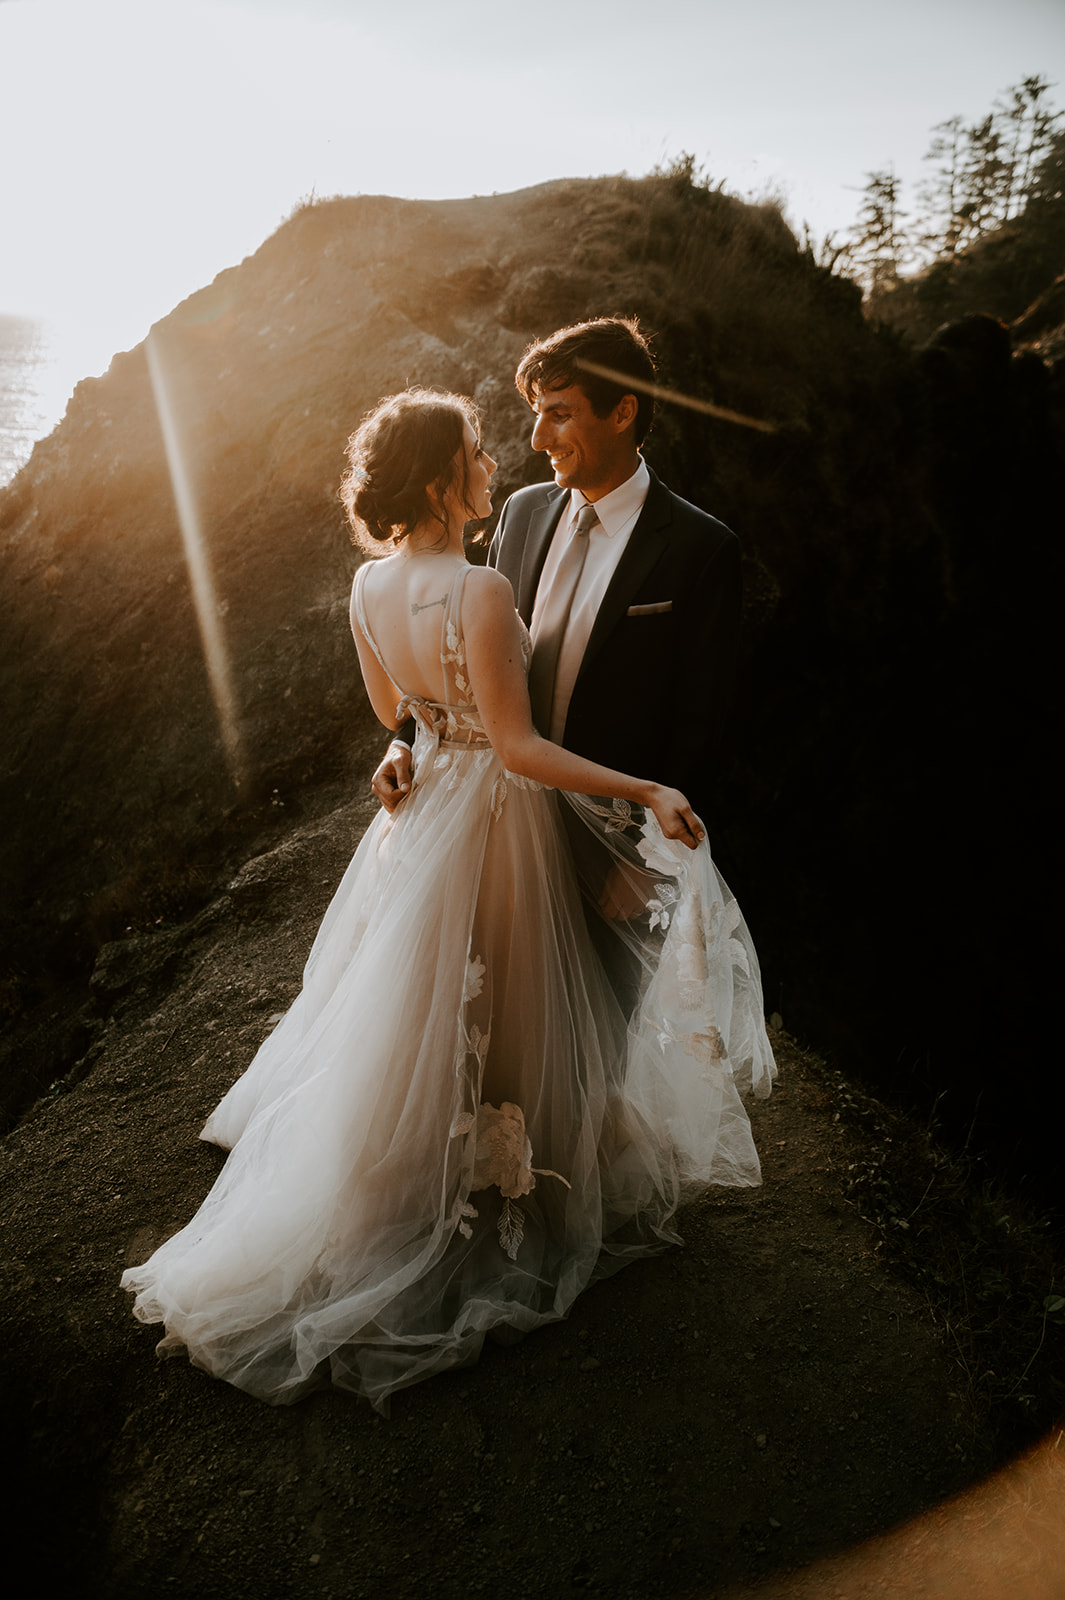 Bride and groom at sunset at the arches at Samuel h boardman on the Oregon coast